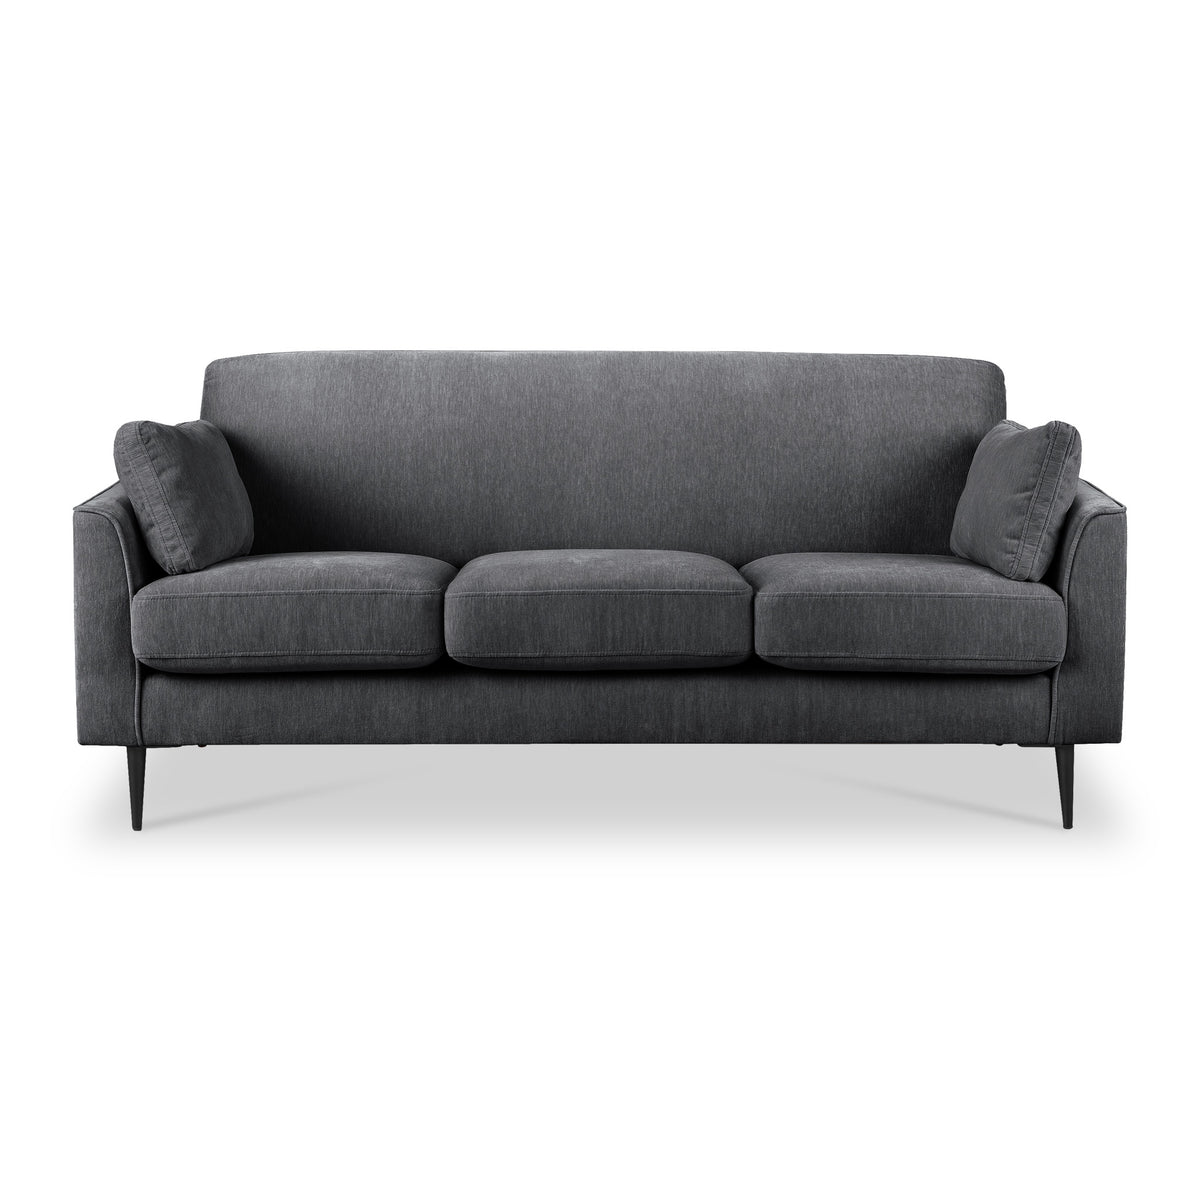 Esme Charcoal Grey 3 Seater Sofa from Roseland Furniture